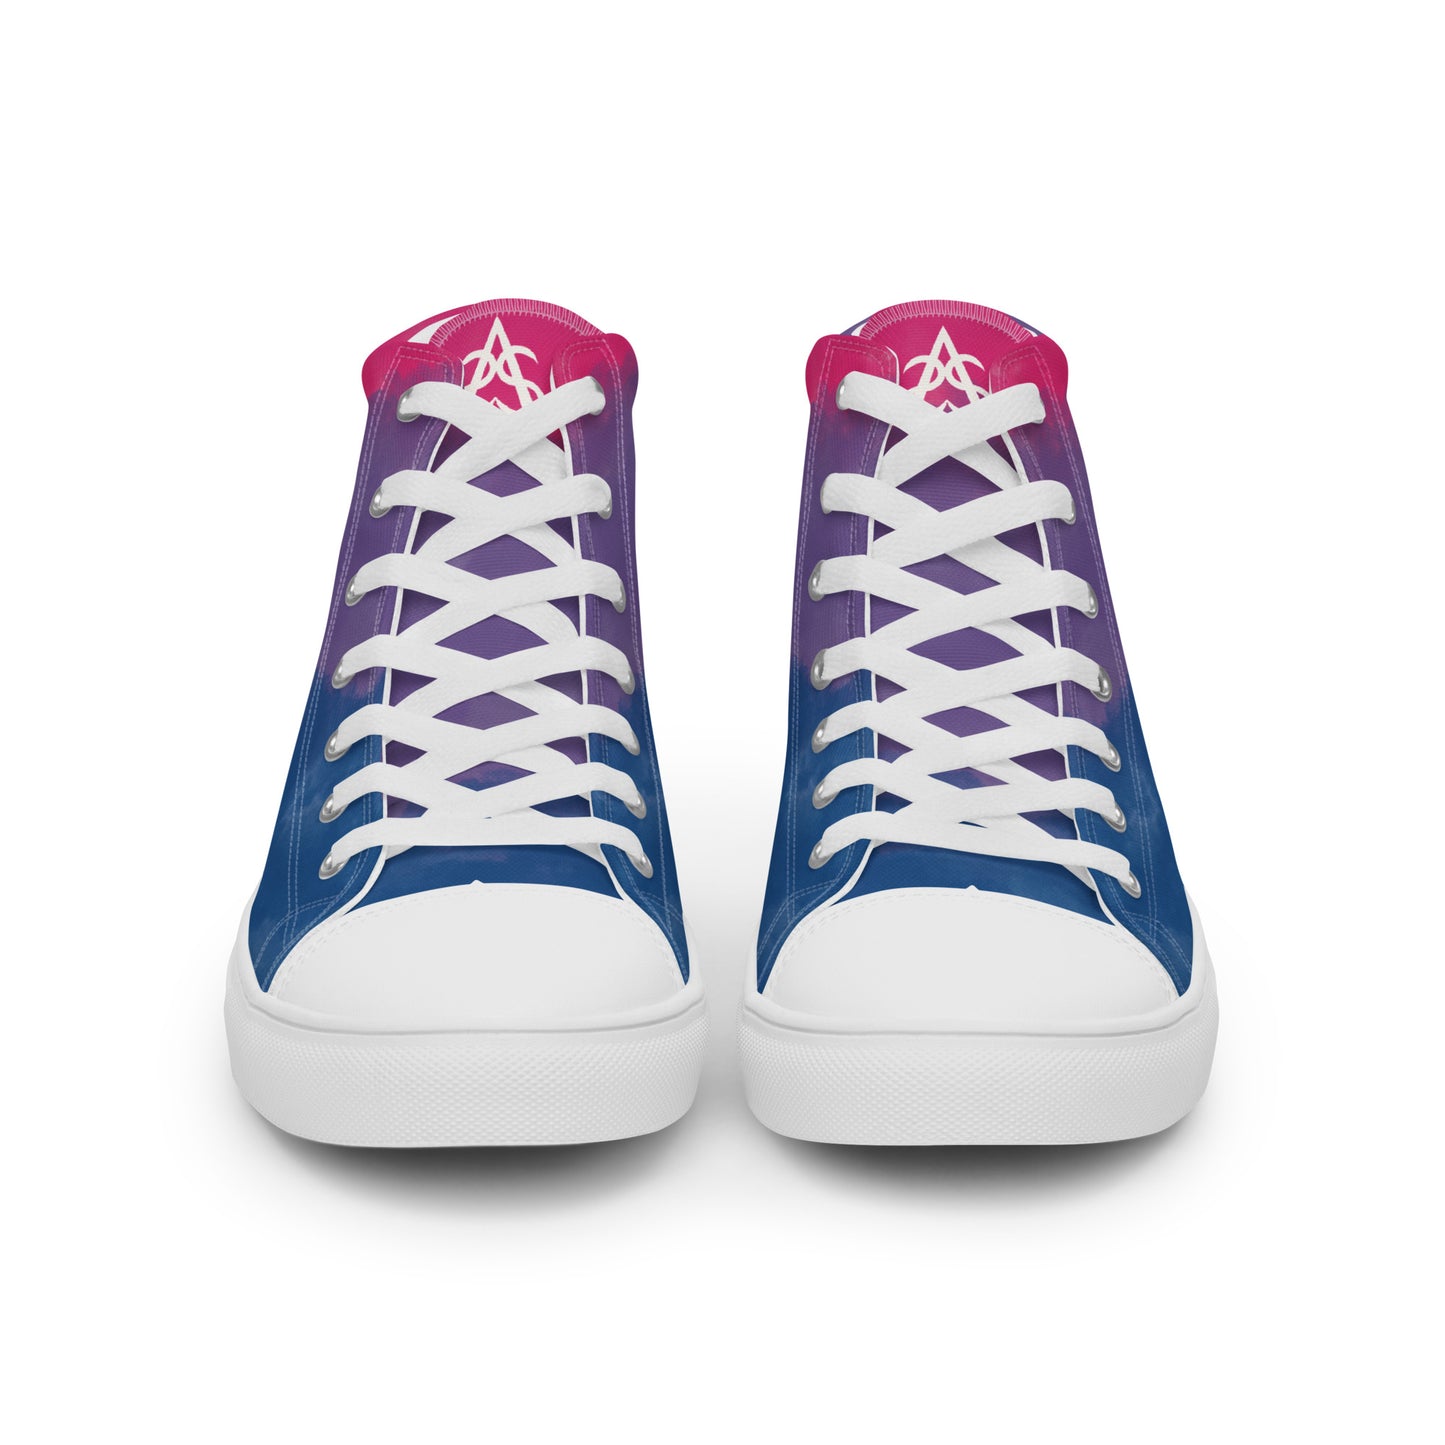 Front view: a pair of high top shoes with color block pink, purple, and blue clouds, a white hand drawn heart, and the Aras Sivad logo on the back.